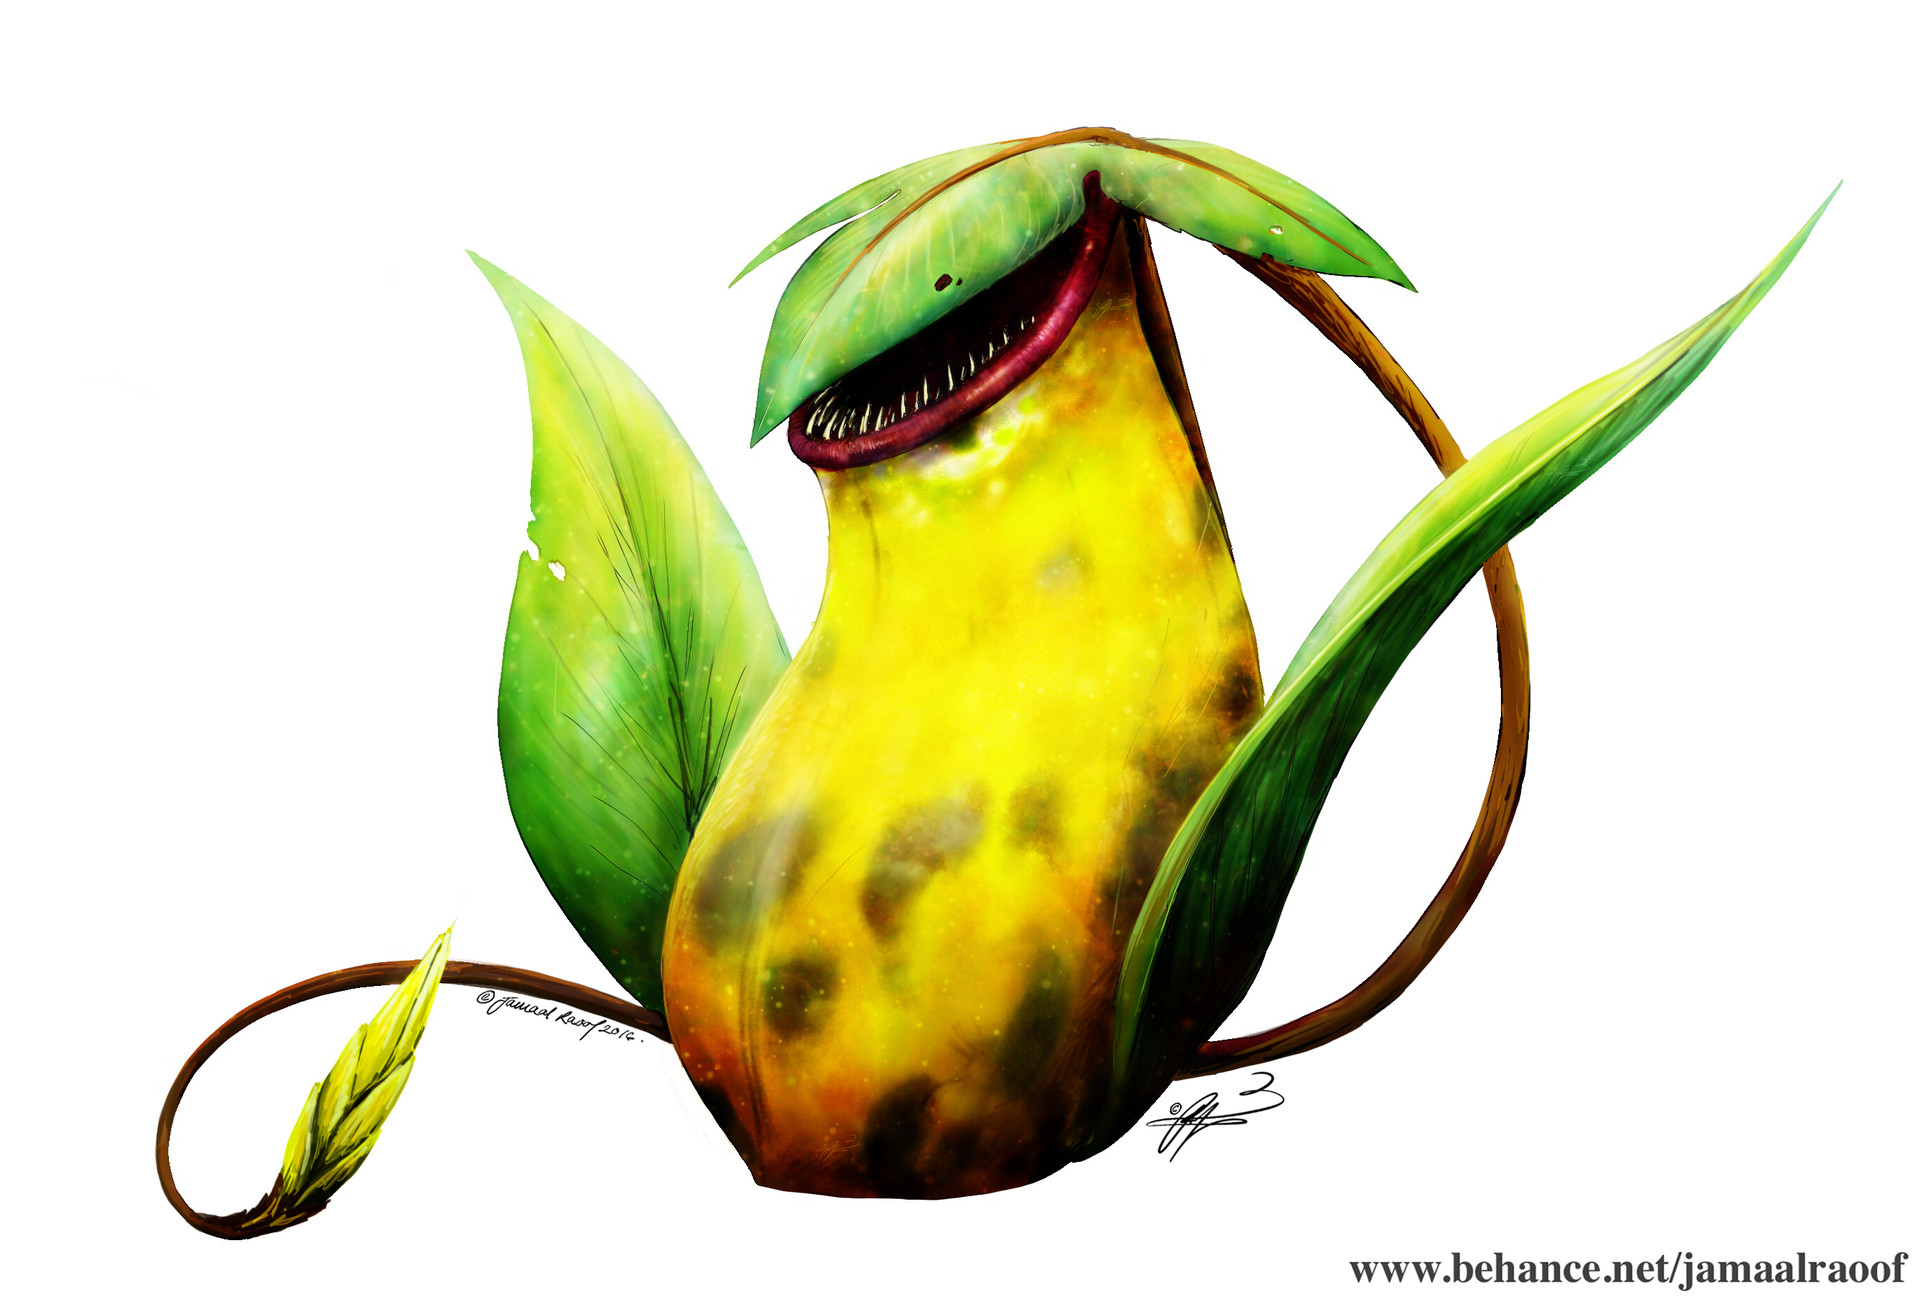 Pokemon in real life: Nepenthes-Victreebel